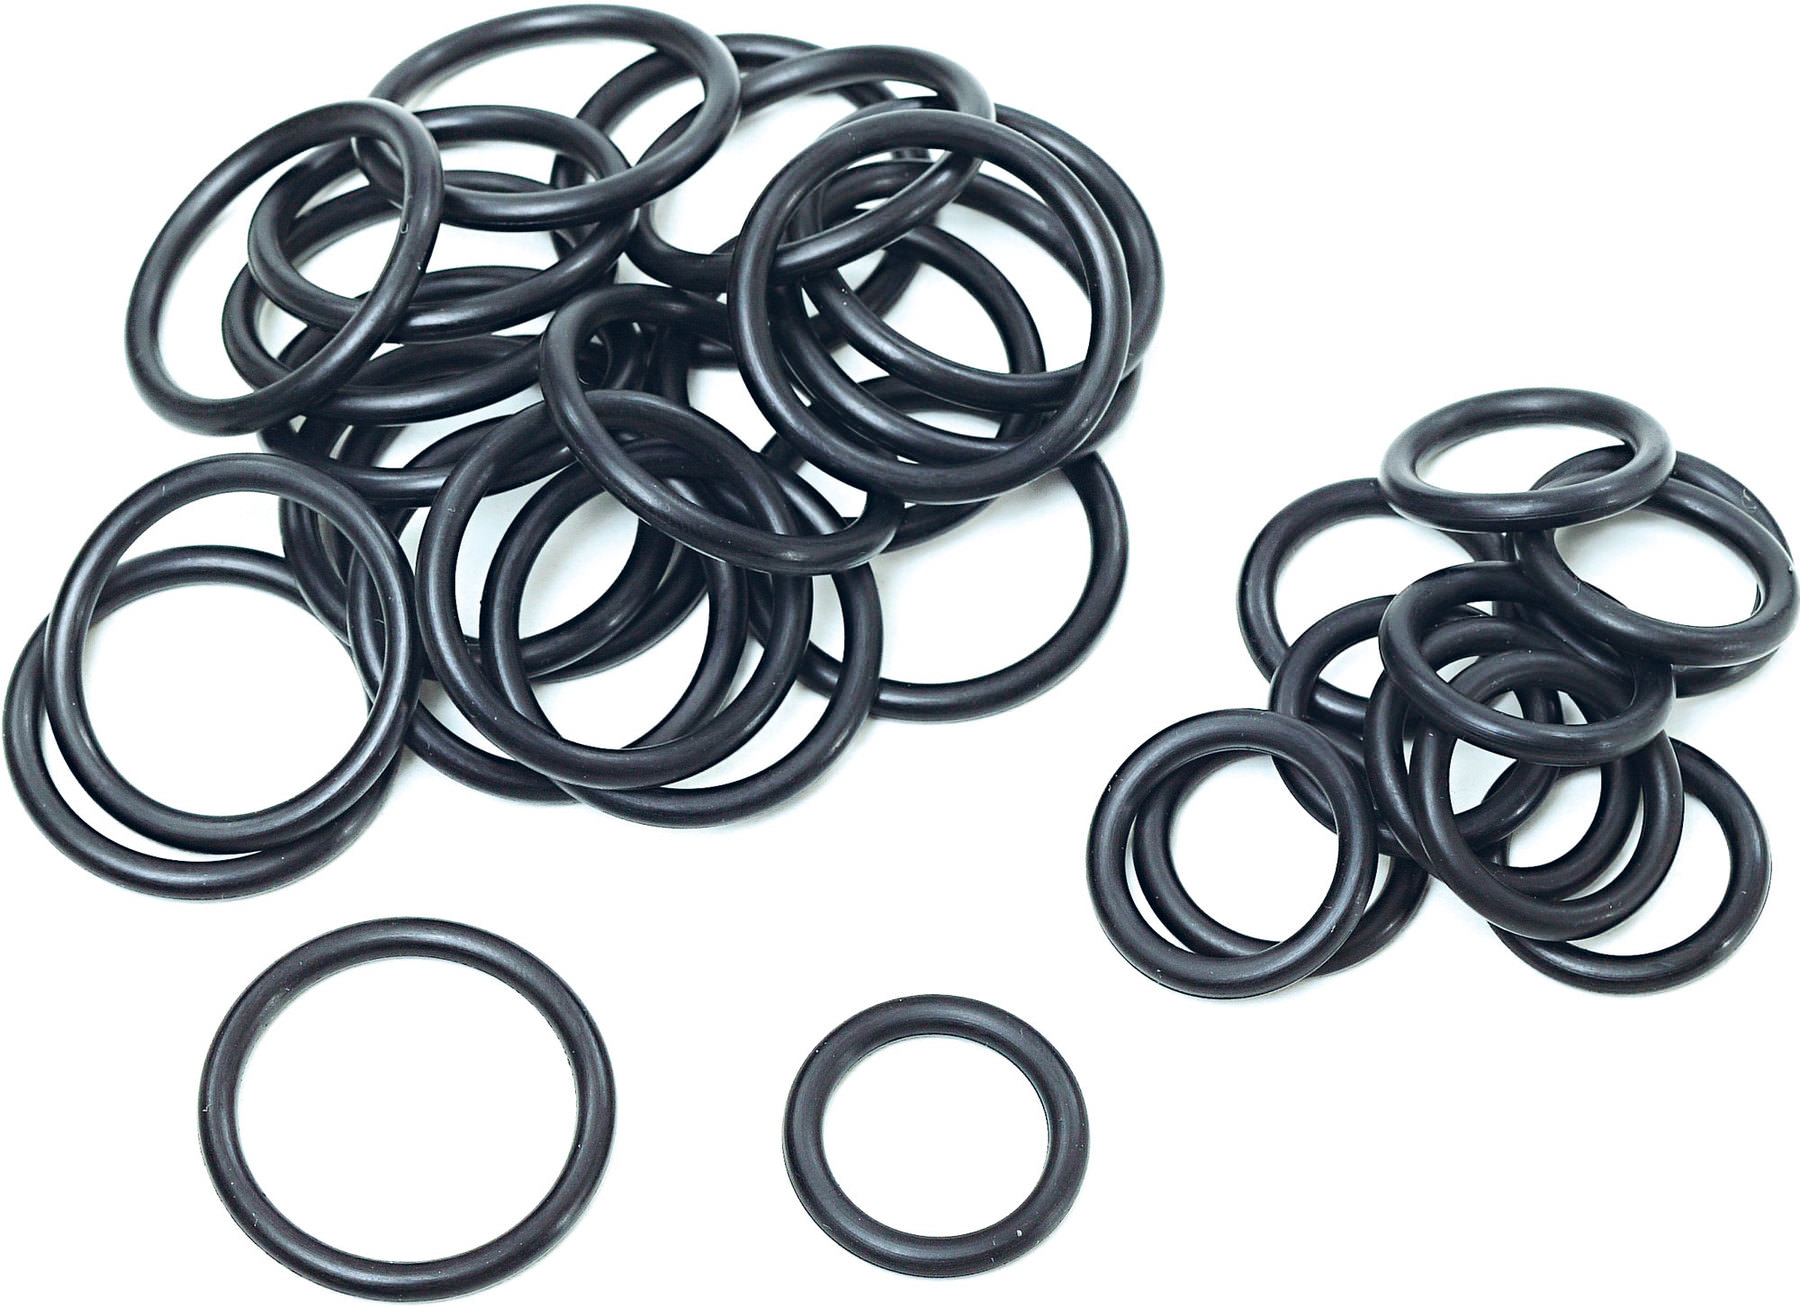 4018 O-ring Head Kit travaille avec nous Jetting Sewer jetter 15 Ring Set ORING O Ring 